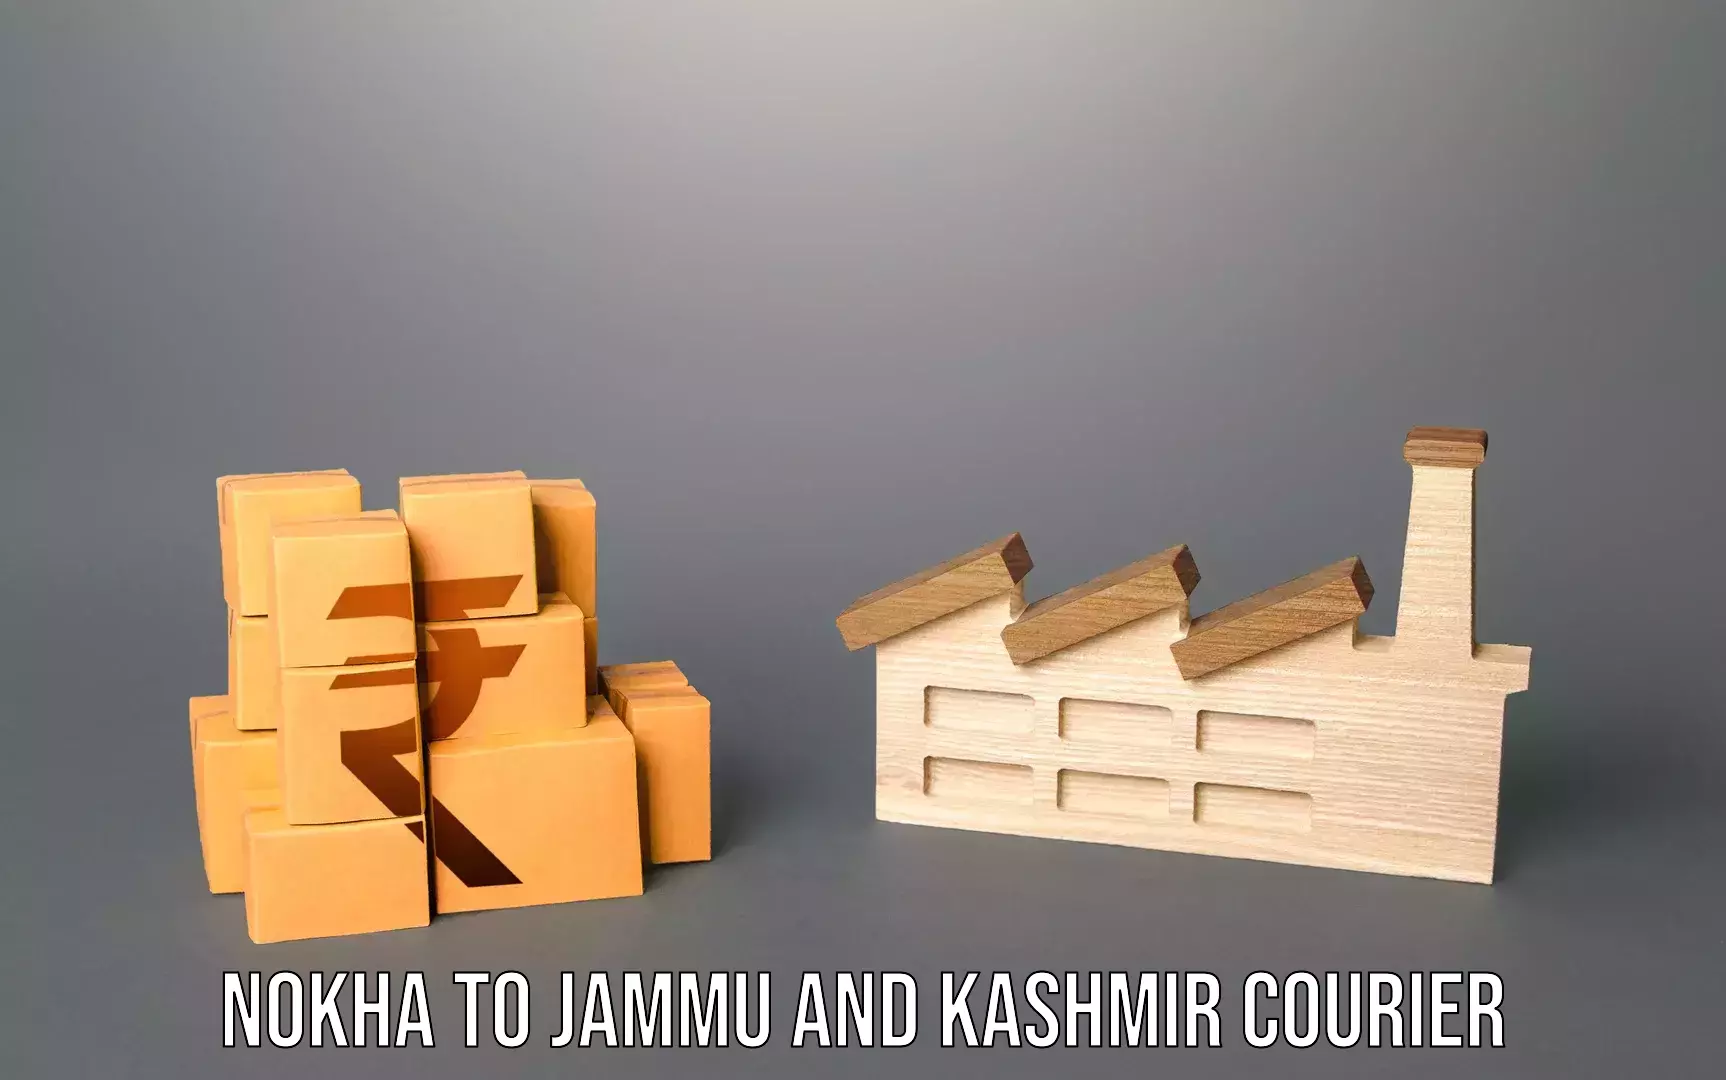 Luggage transport consultancy Nokha to Jammu and Kashmir